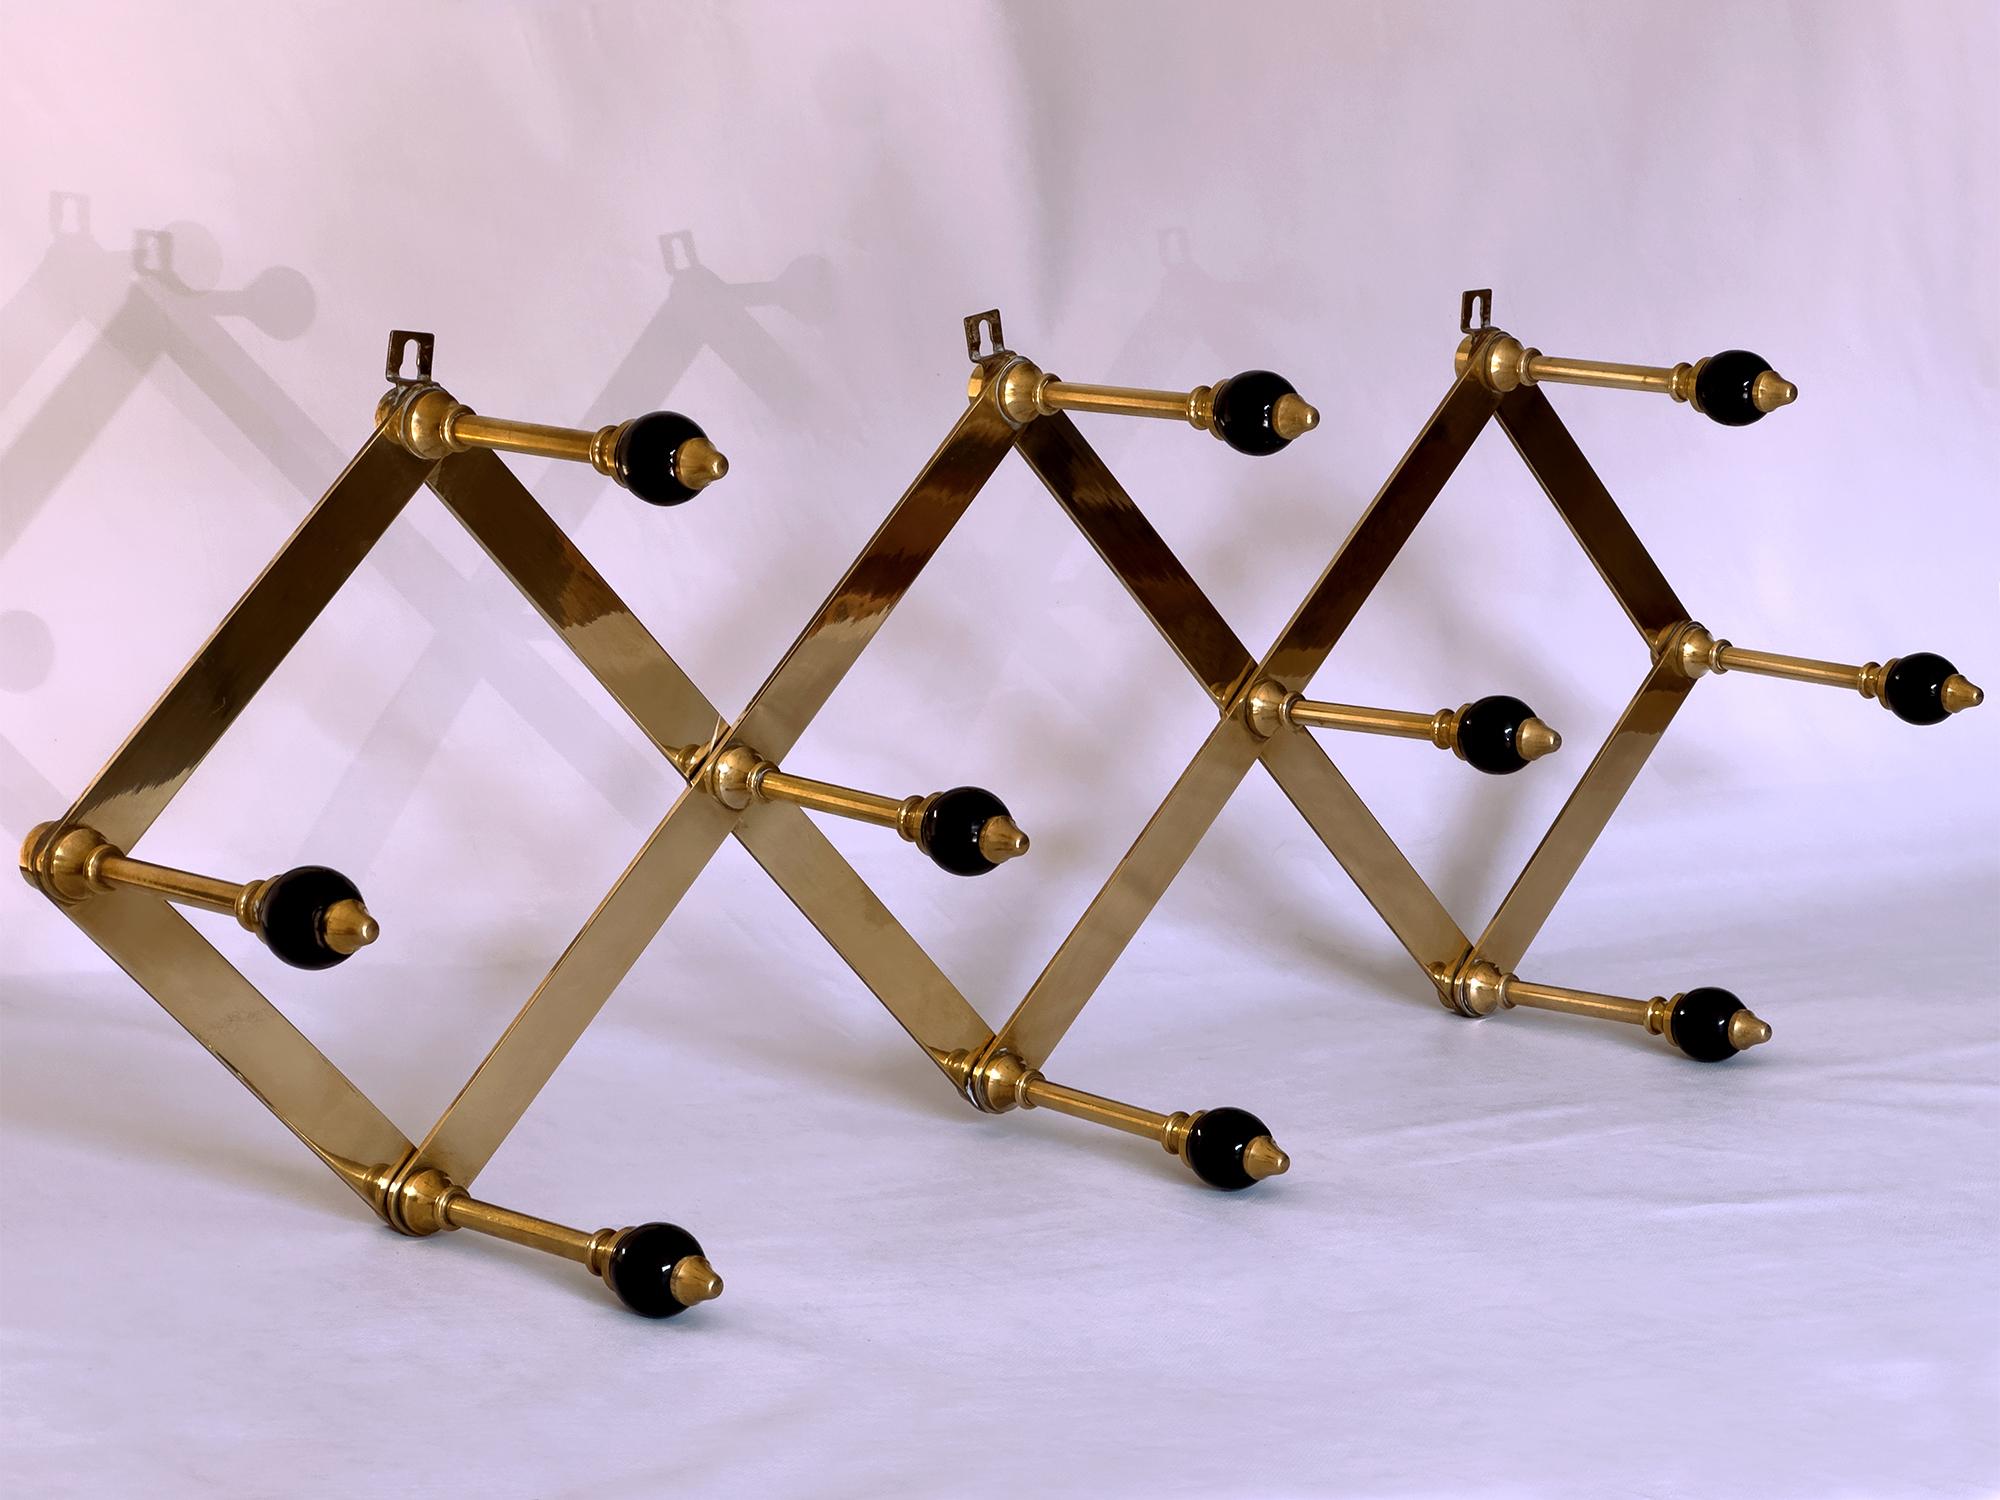 Stunning Italian Coat Hanger of the 1950s, model 'At4 Fisarmonica', well designed by Arch. Luigi Caccia Dominioni for Azucena.
Its structure is adjustable in length and is made of brass with black lacquered wooden knobs.
The dimensions are variable,